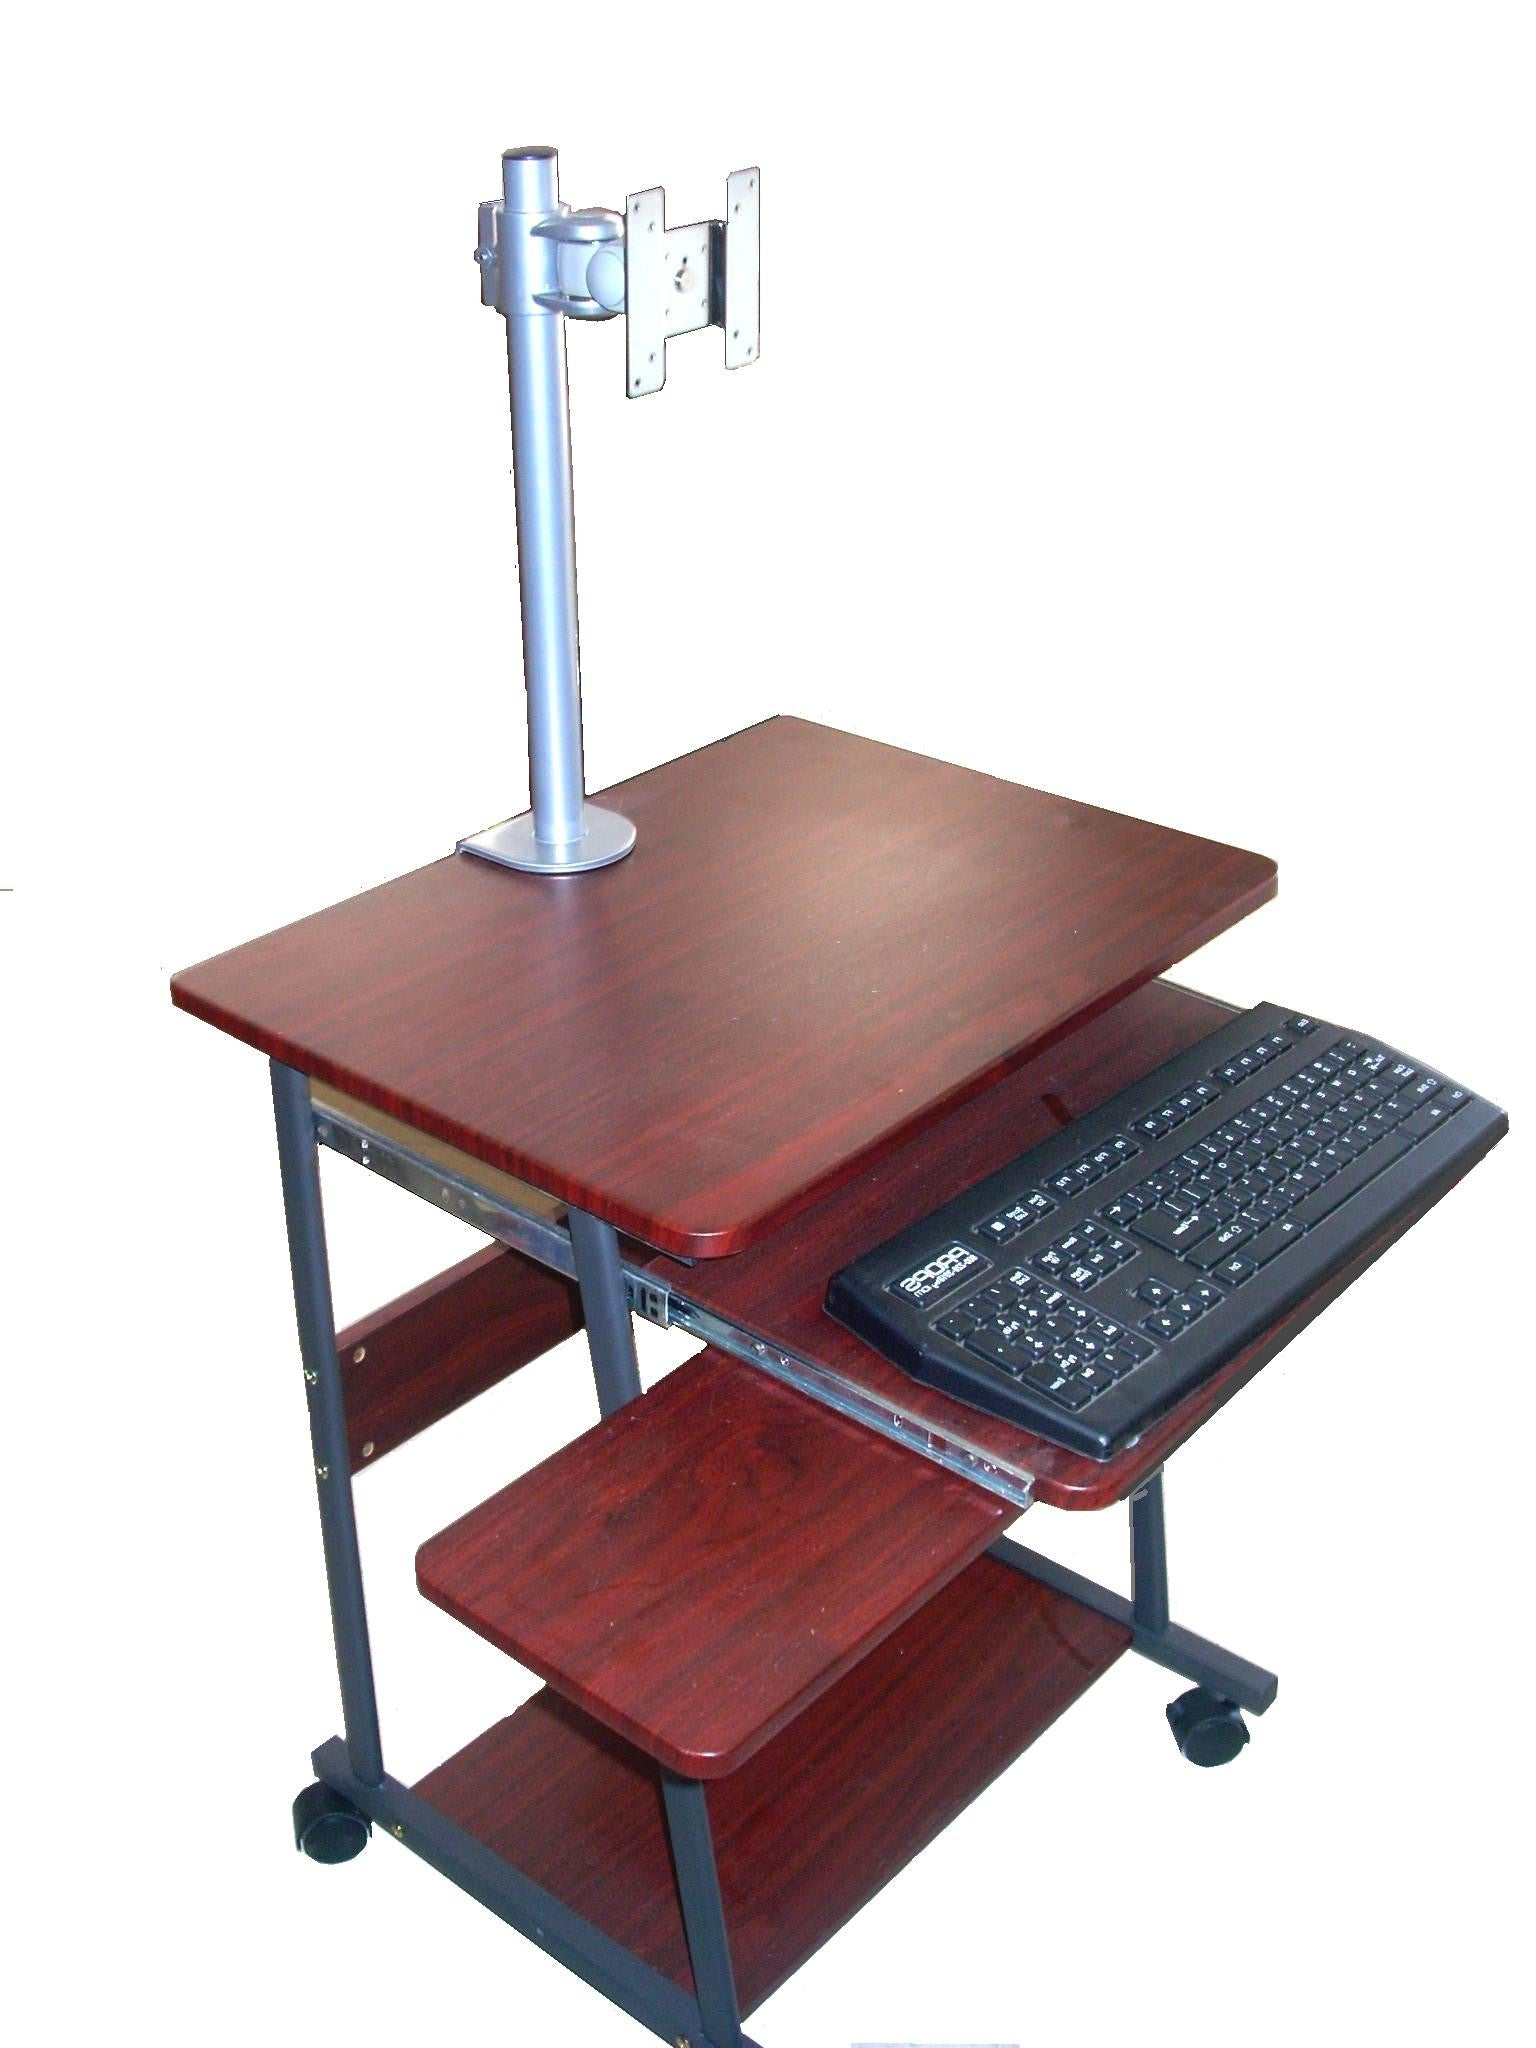 24" compact mobile computer desk with keyboard tray & mouse tray shown with lcd monitor desk stand clamp on